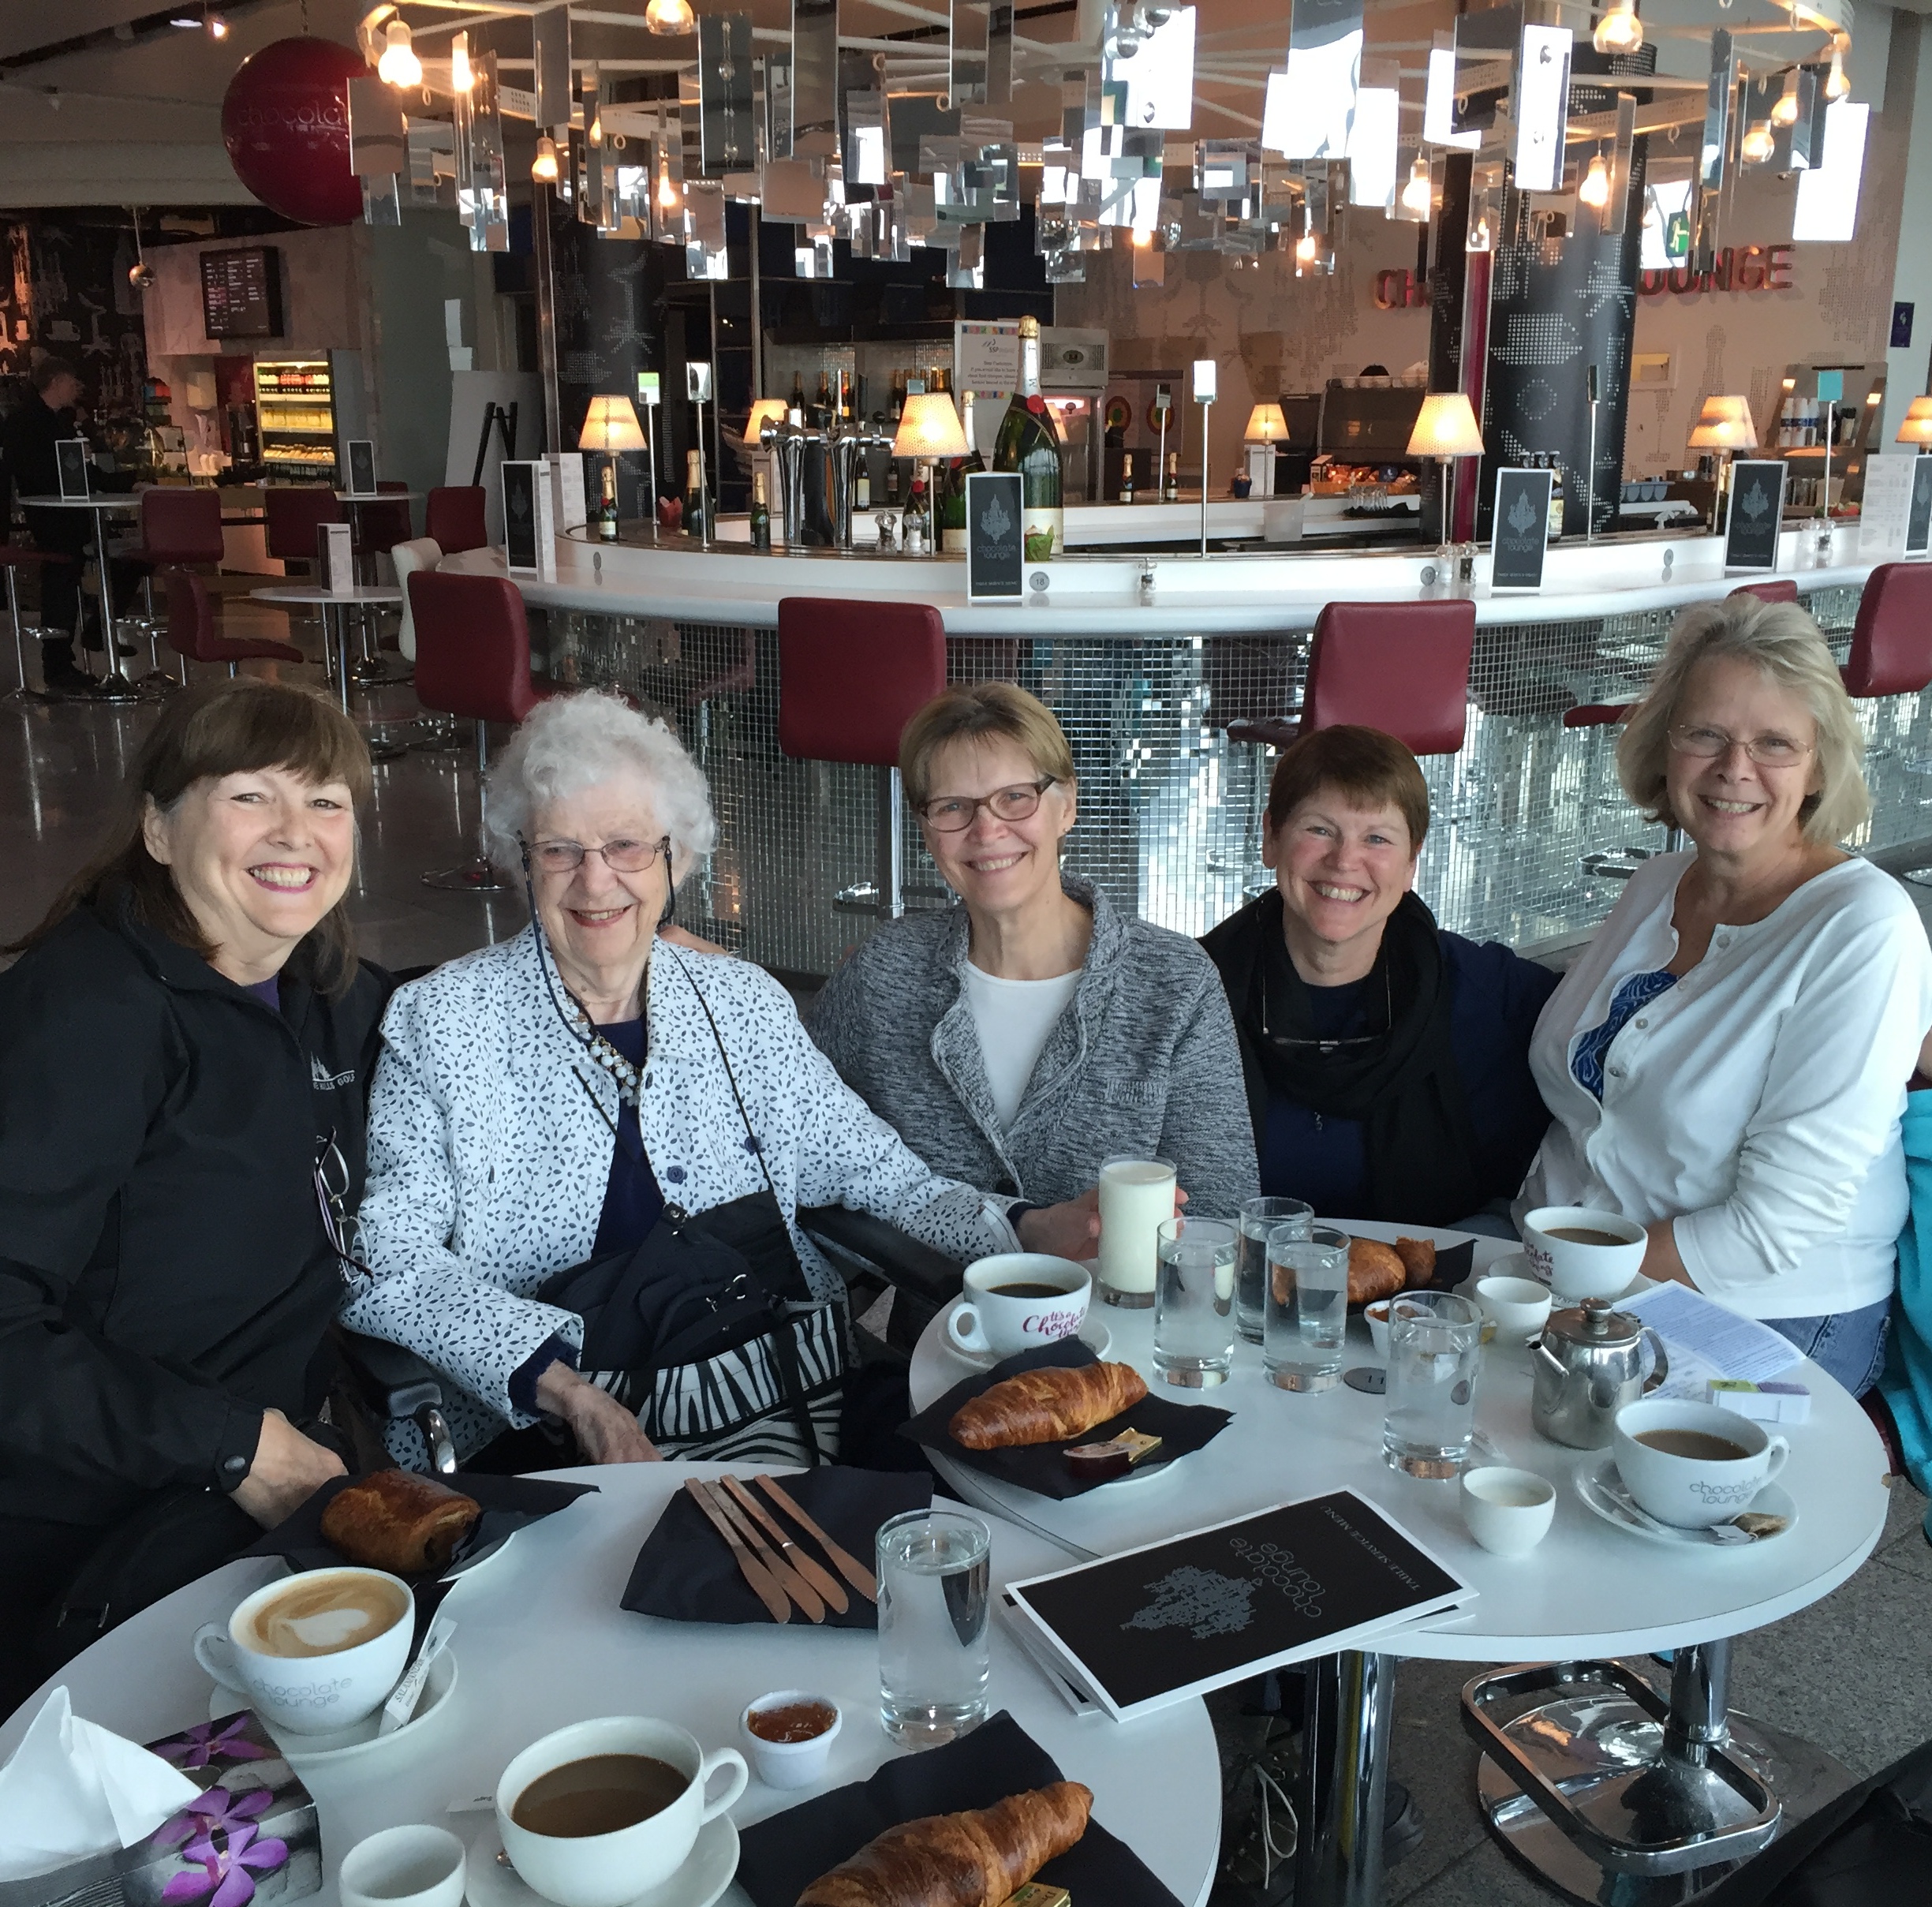 At the Dublin Airport -- our last breakfast in Ireland. From left: Martha, Roberta, Sara, Molly and Annis. Photo by our waiter.